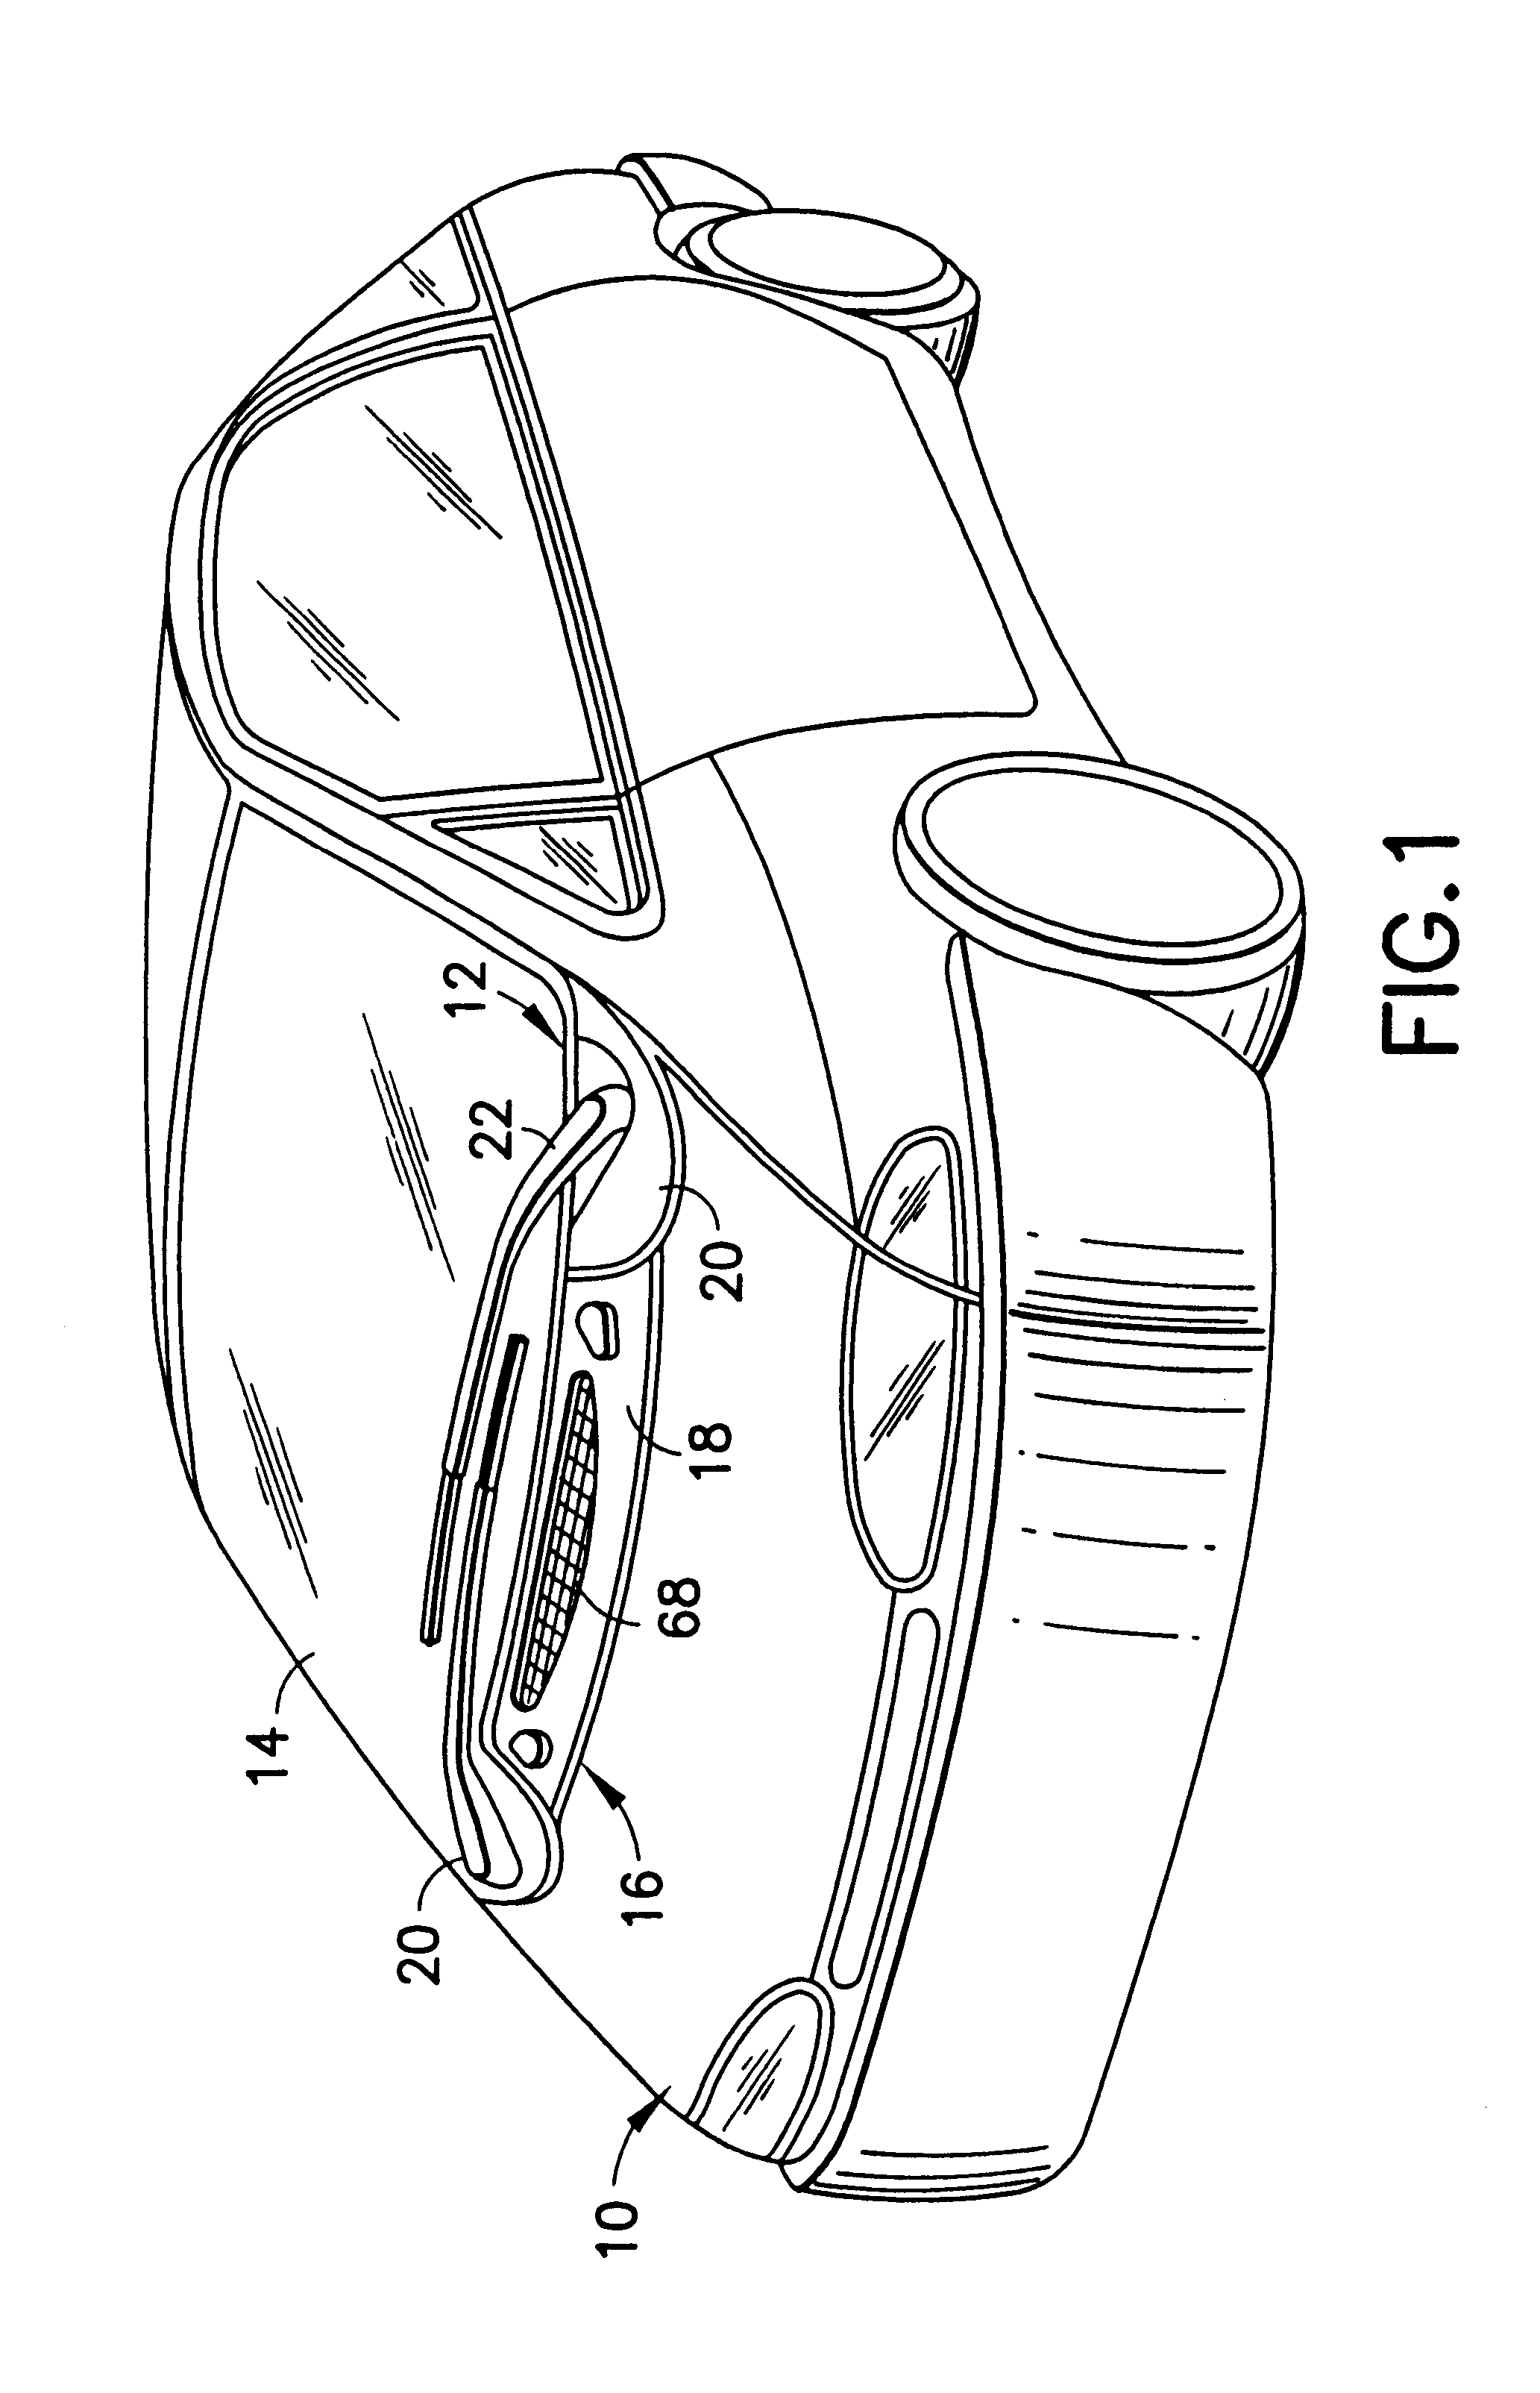 Modular apparatus for washing and wiping a vehicle windshield